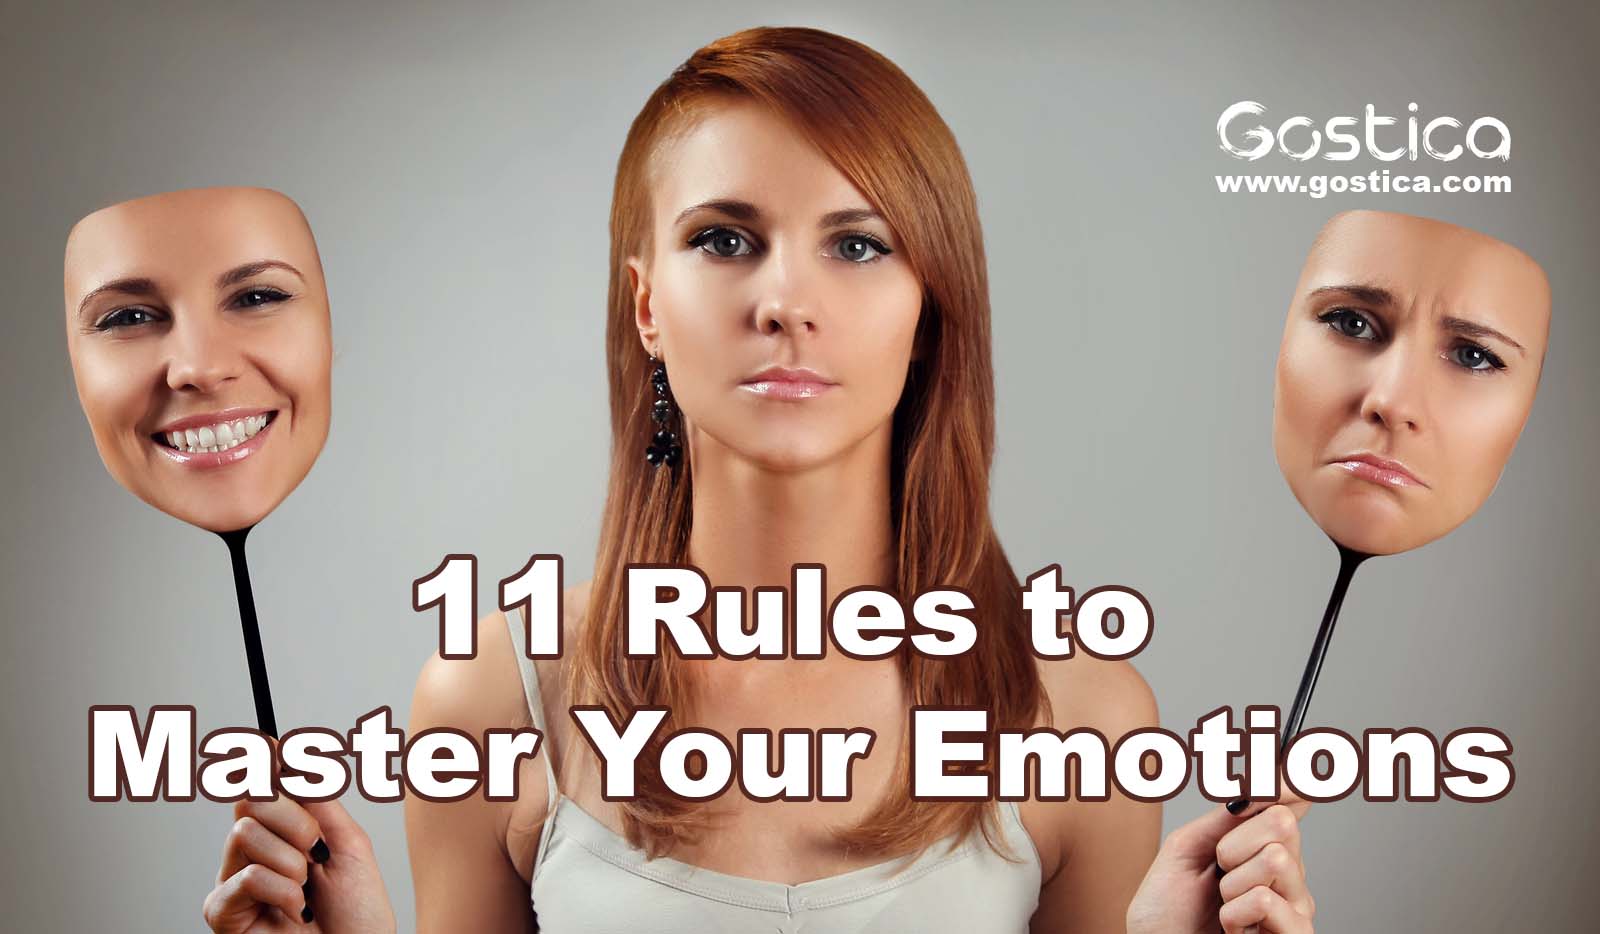 11-Rules-to-Master-Your-Emotions.jpg